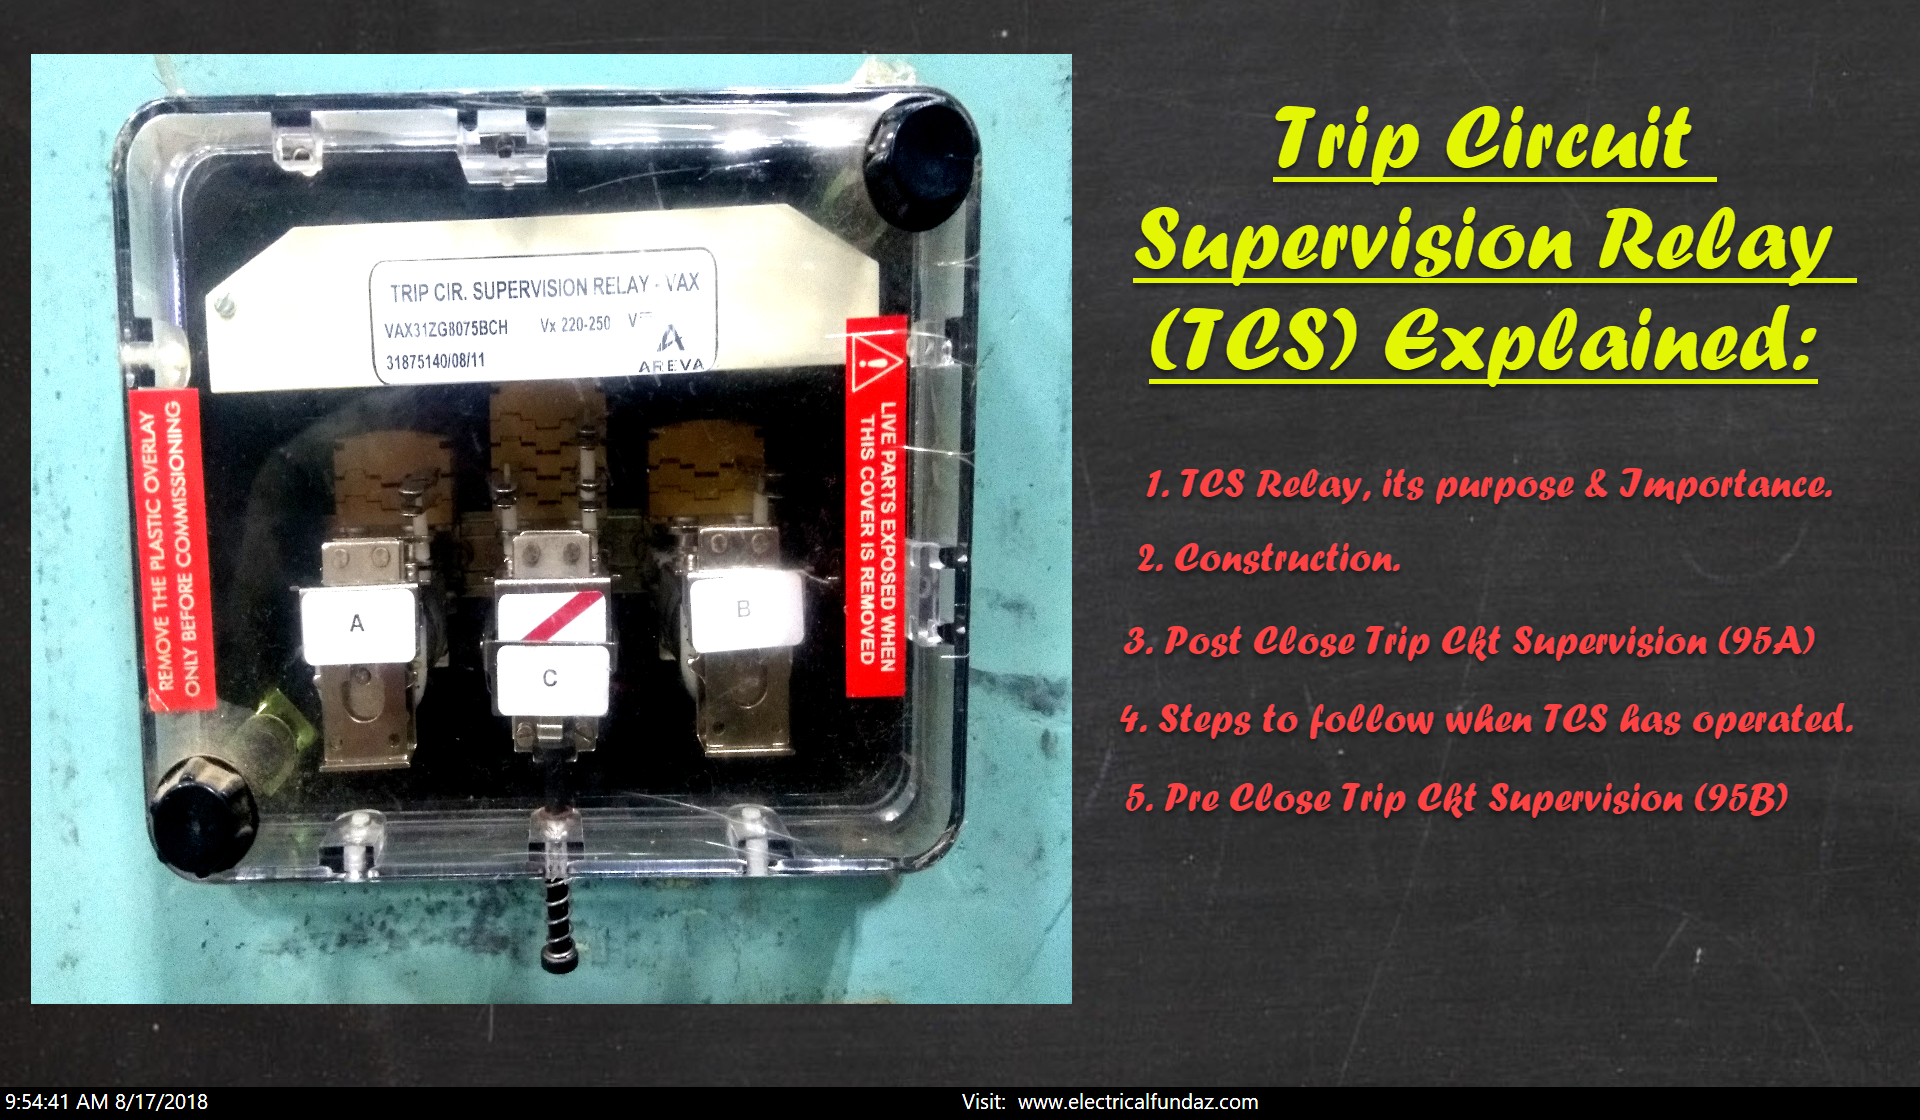 Trip Circuit supervision relay